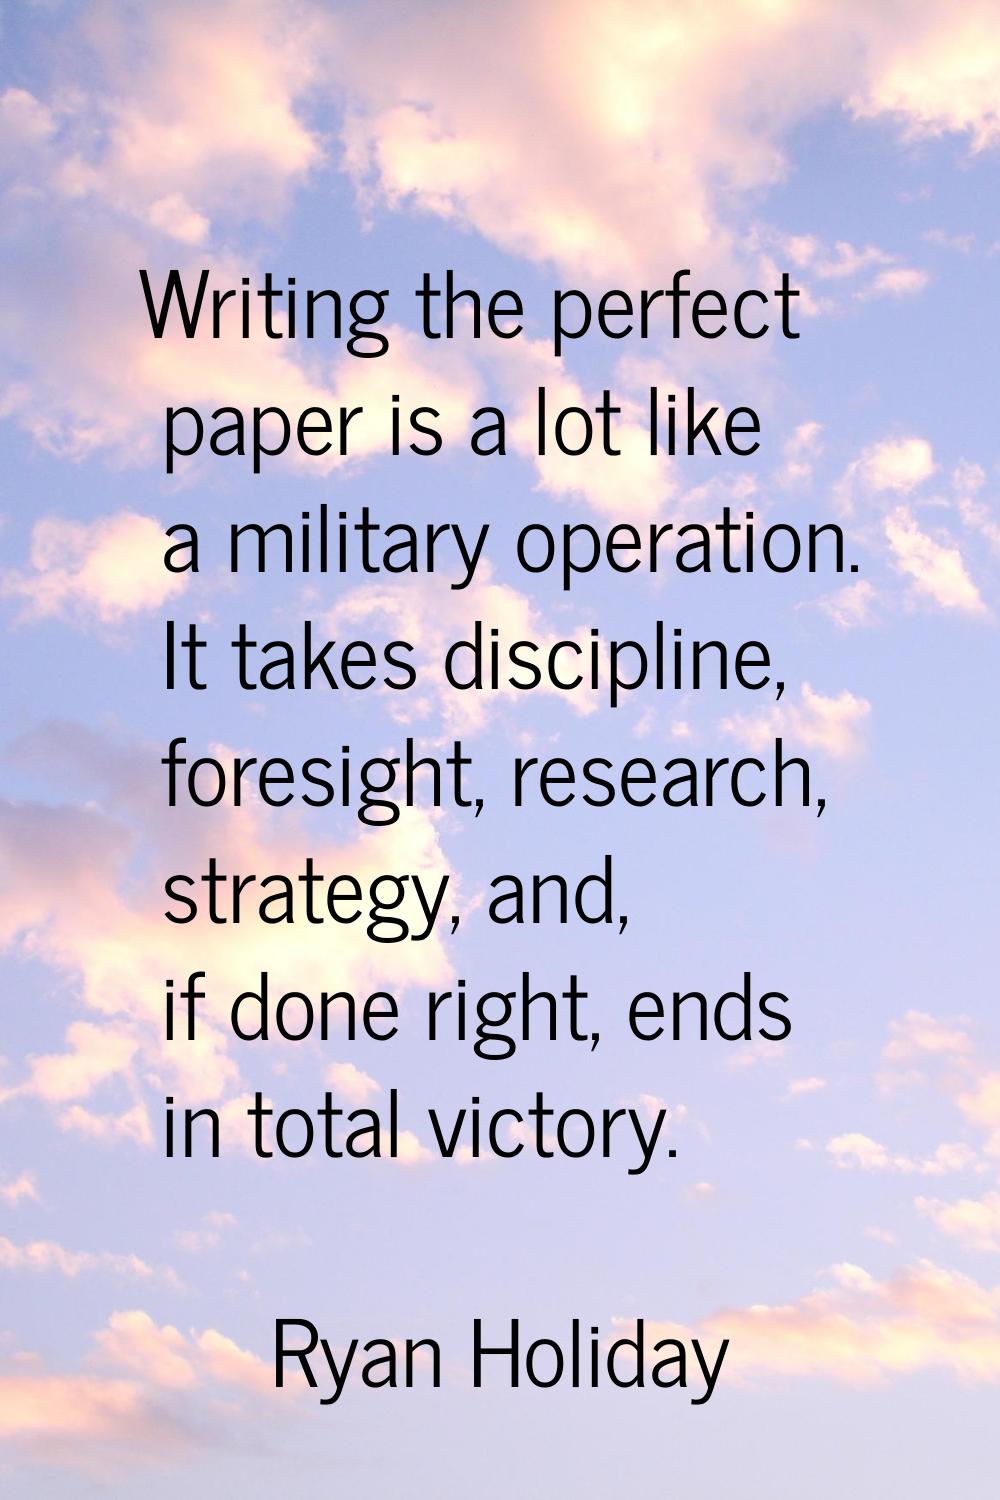 Writing the perfect paper is a lot like a military operation. It takes discipline, foresight, resea